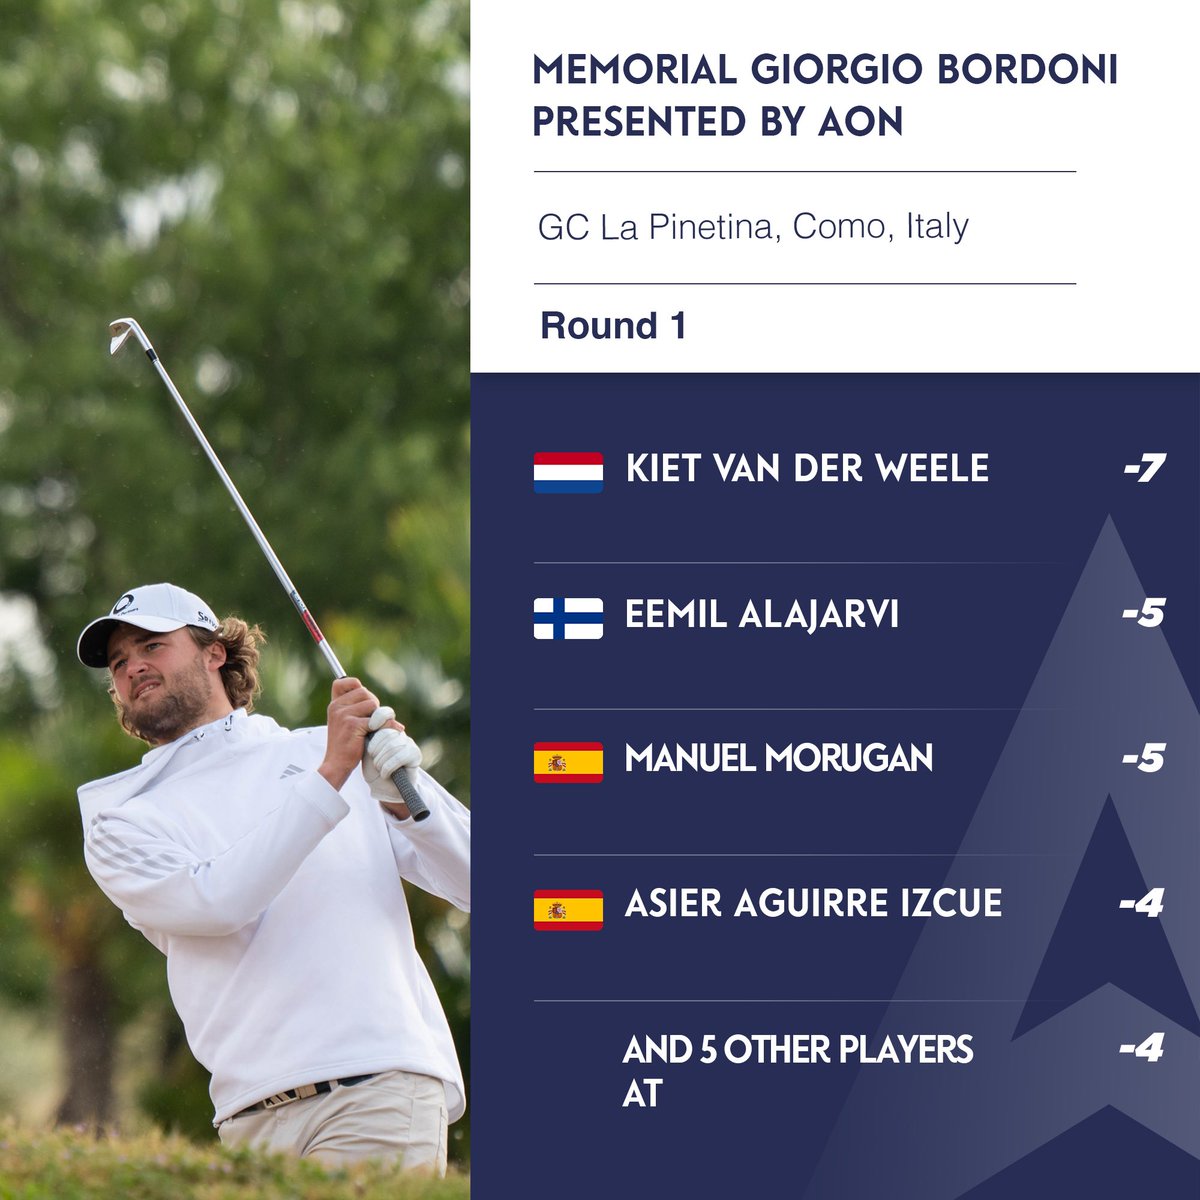 🇳🇱Kiet Van der Weele has a 2 strokes lead after the 1st round at the ⛳️2023 Memorial Giorgio Bordoni presented by Aon!  

Follow along to see what happens tomorrow during Round 2. 

📸 Alps Tour Golf

#2023AlpsTourSeason 
#raisinggolfstars 
#risinggolfstars